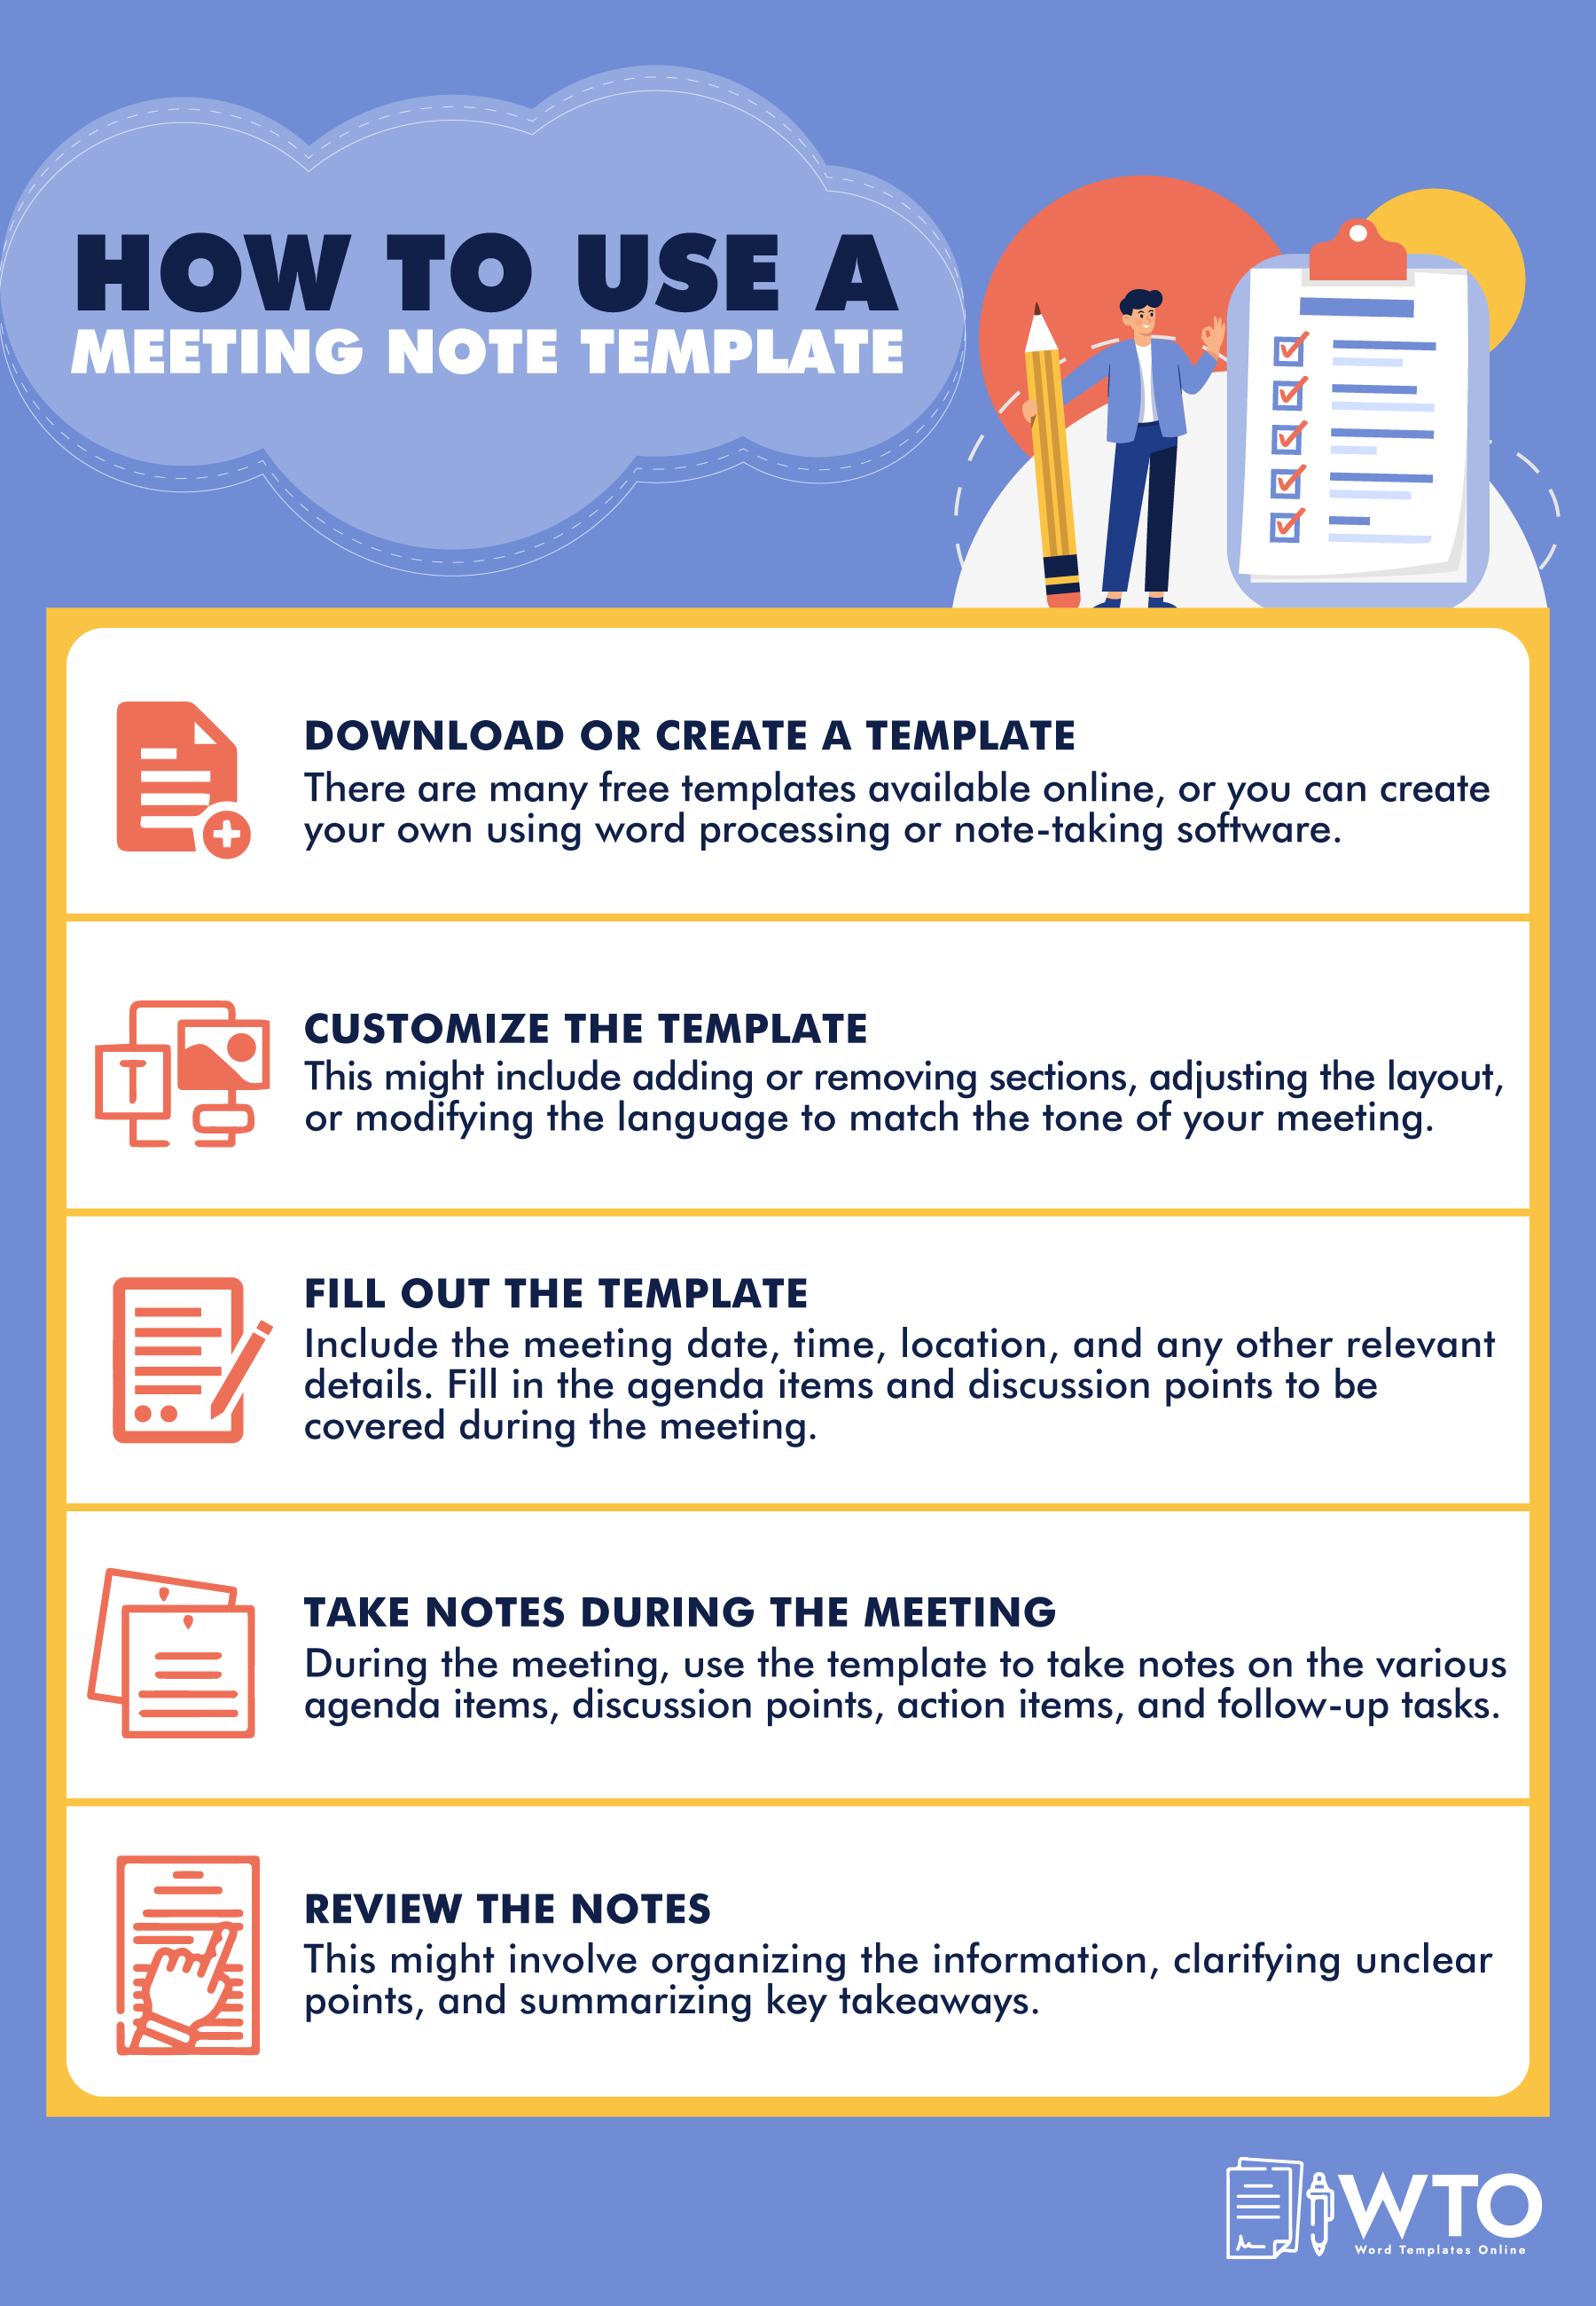 This infographic is about how to use a meeting note template.